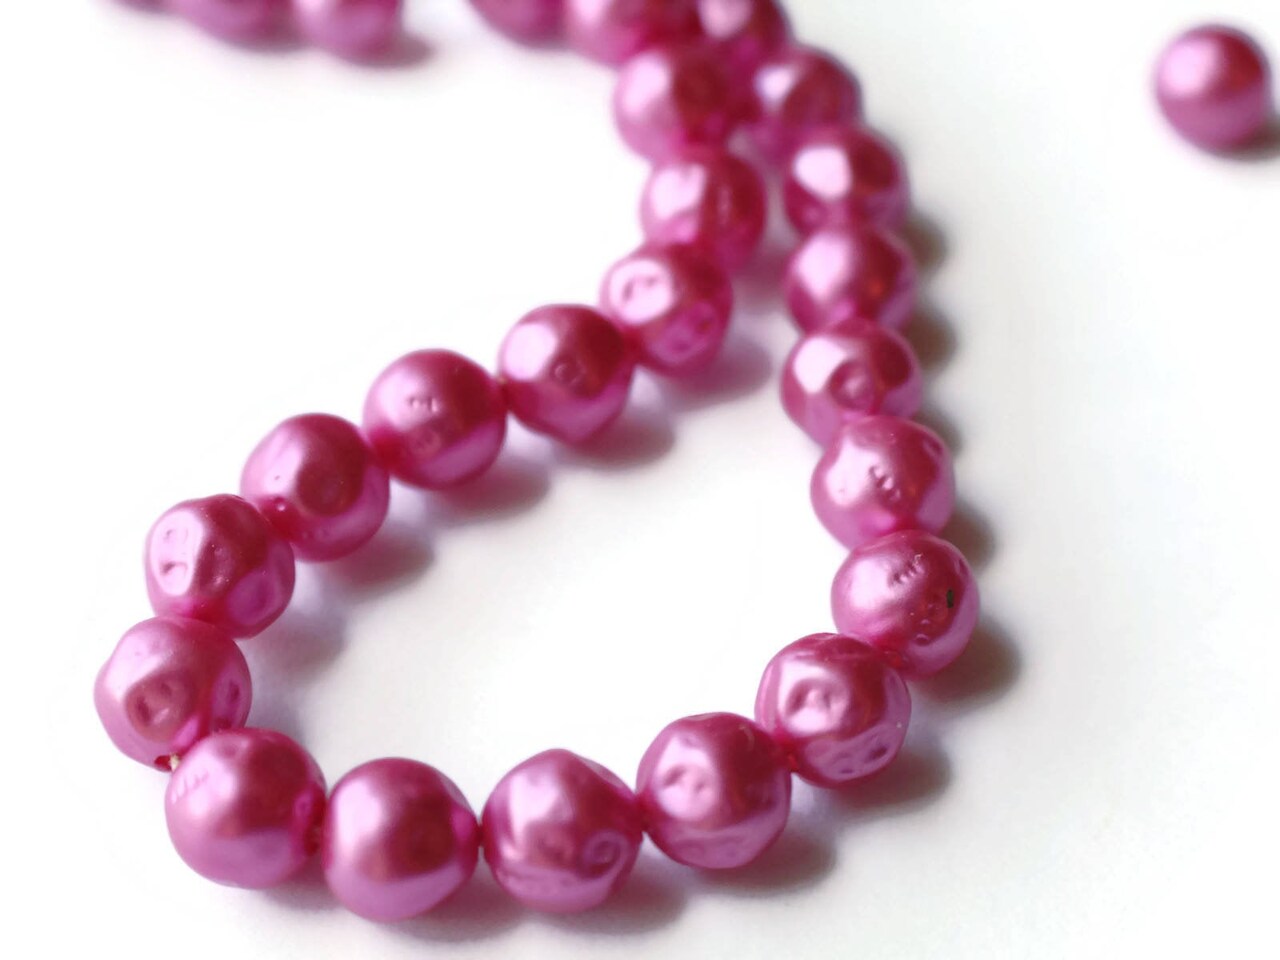 7mm Round Pink Vintage Plastic Pearl Beads Baroque Faux Pearls